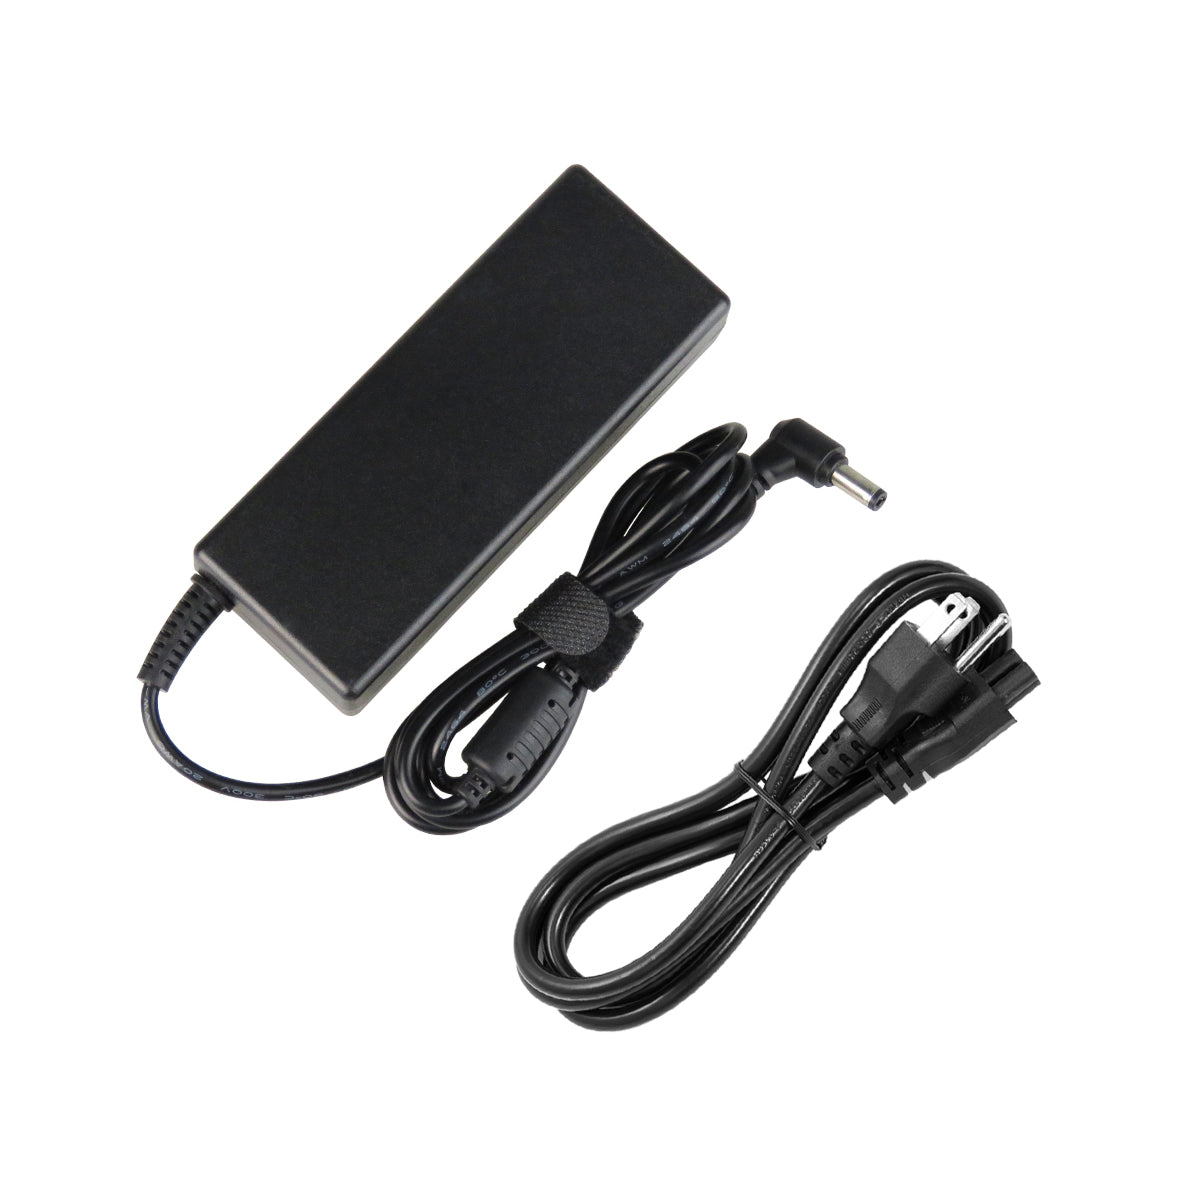 AC Adapter Charger for ASUS F75VD Notebook.